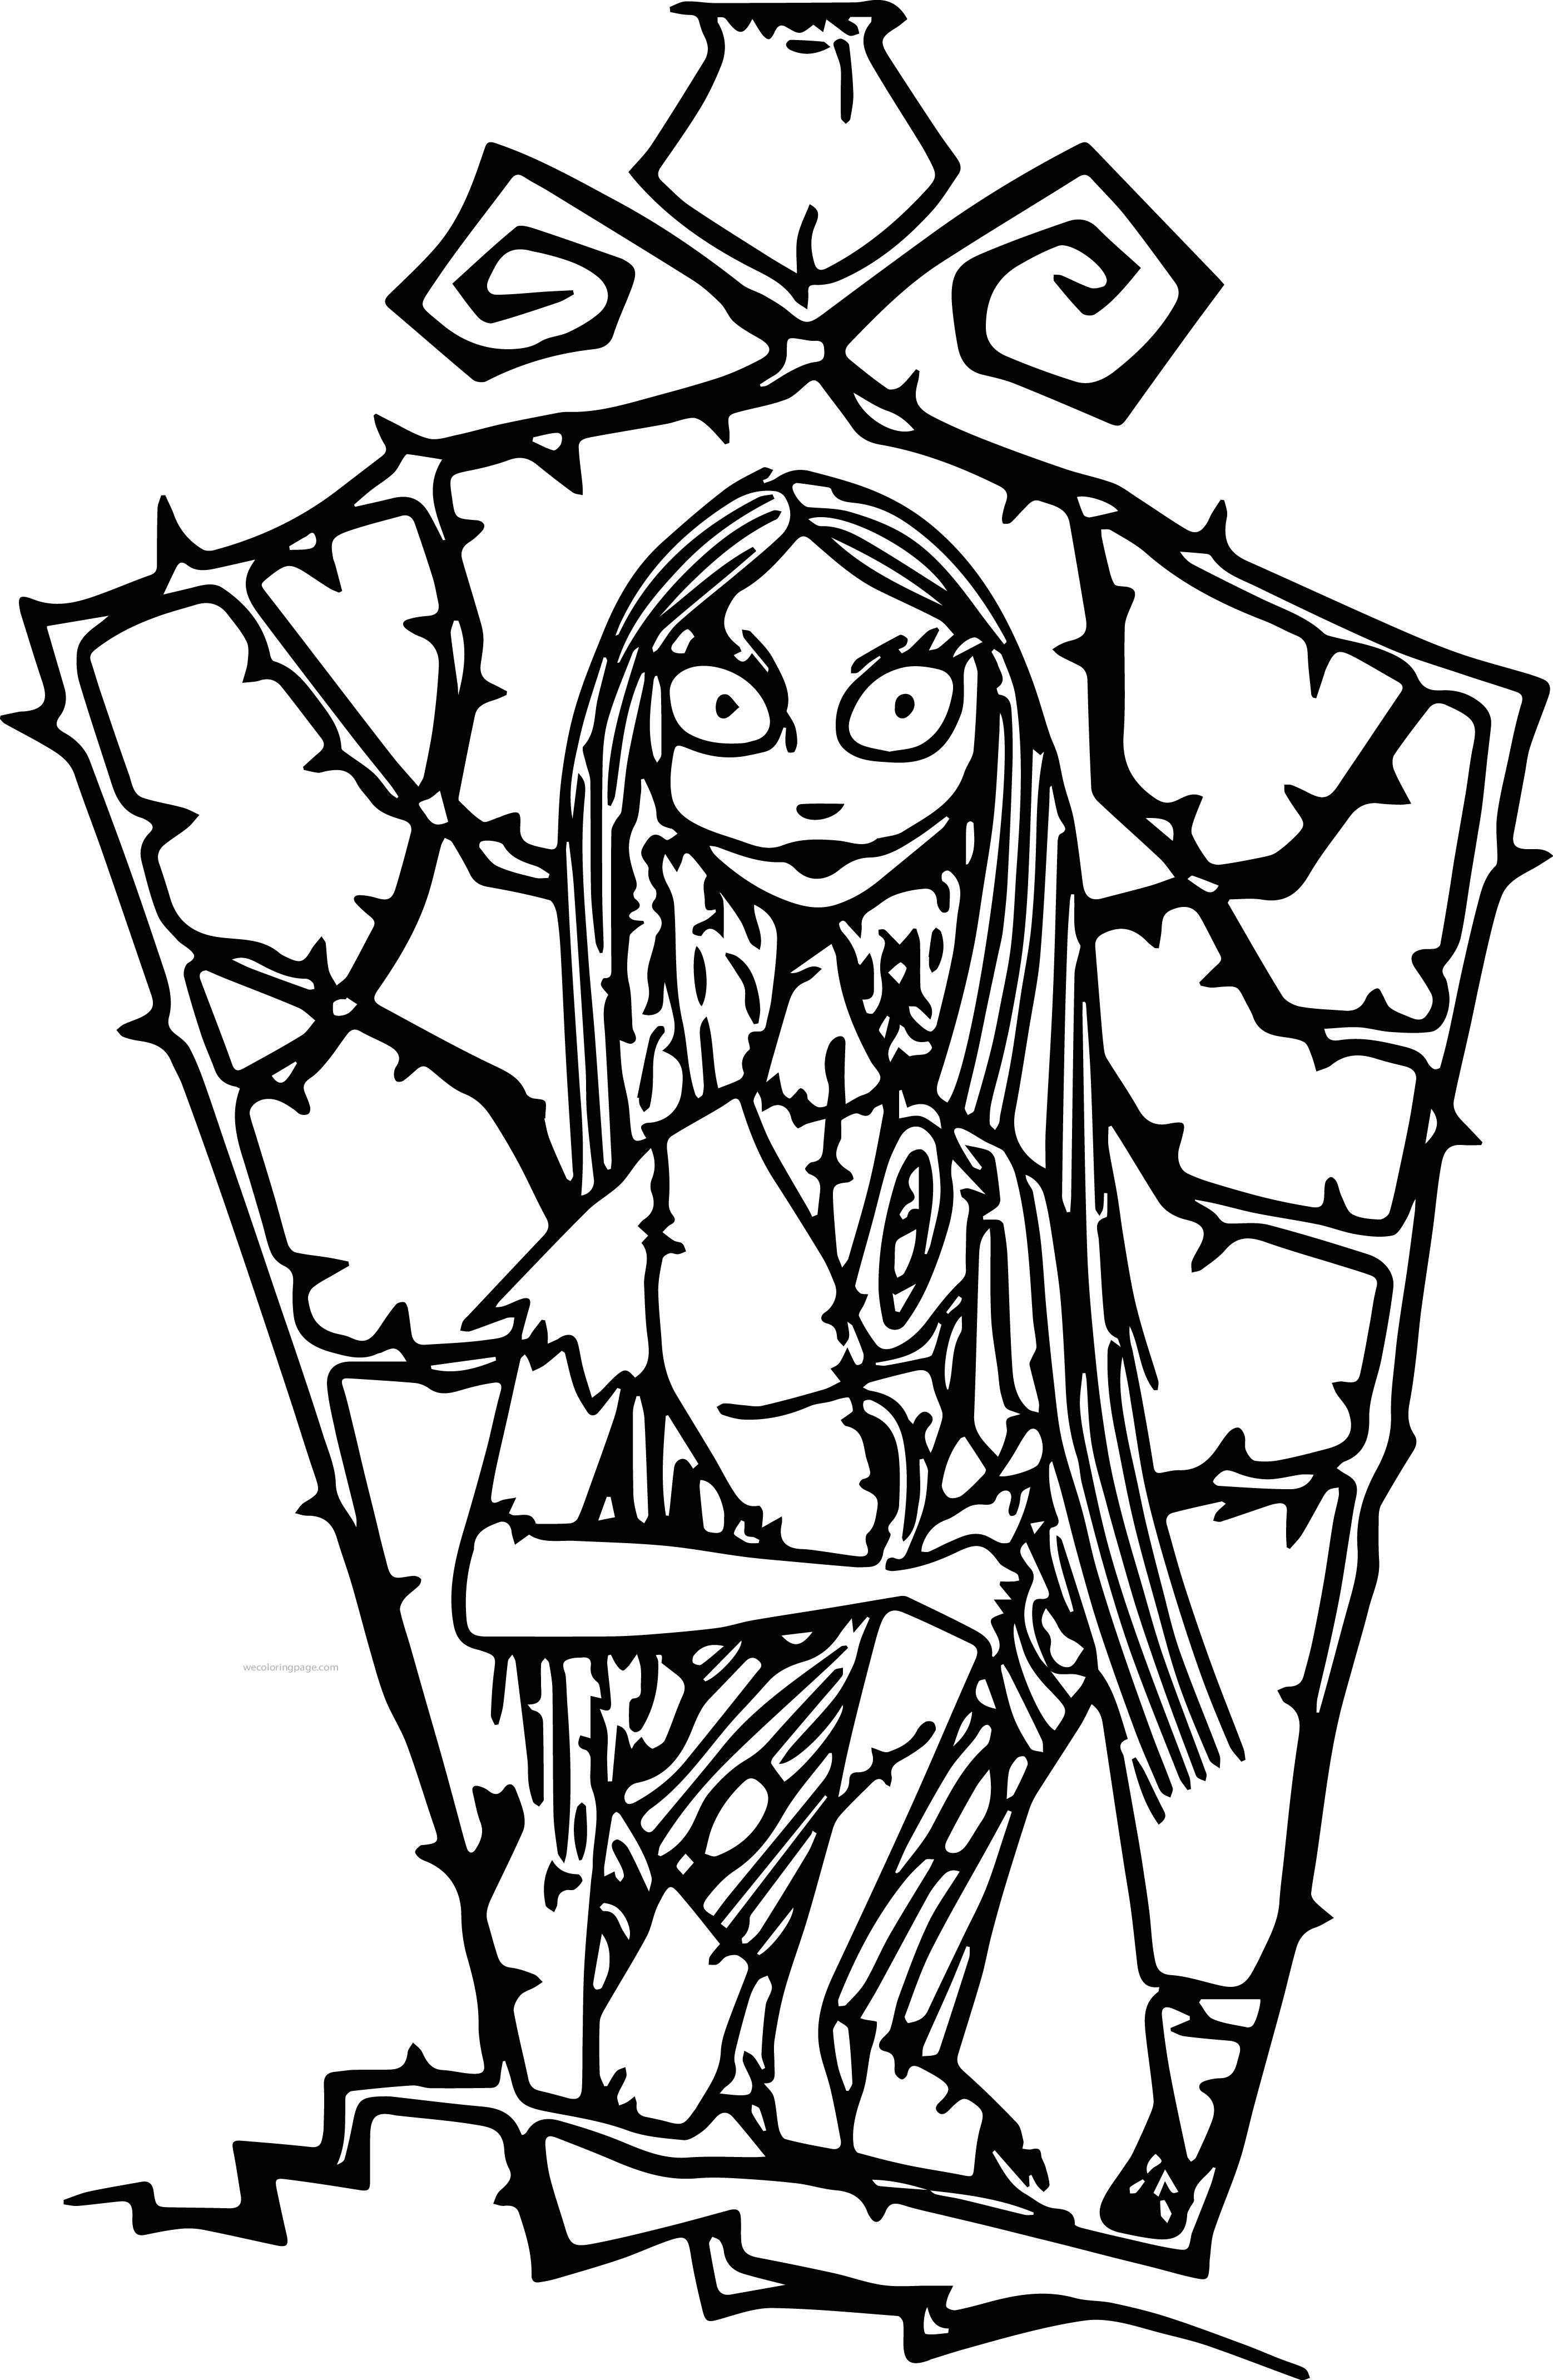 Free Nightmare Before Christmas Coloring Pages Printable at GetDrawings